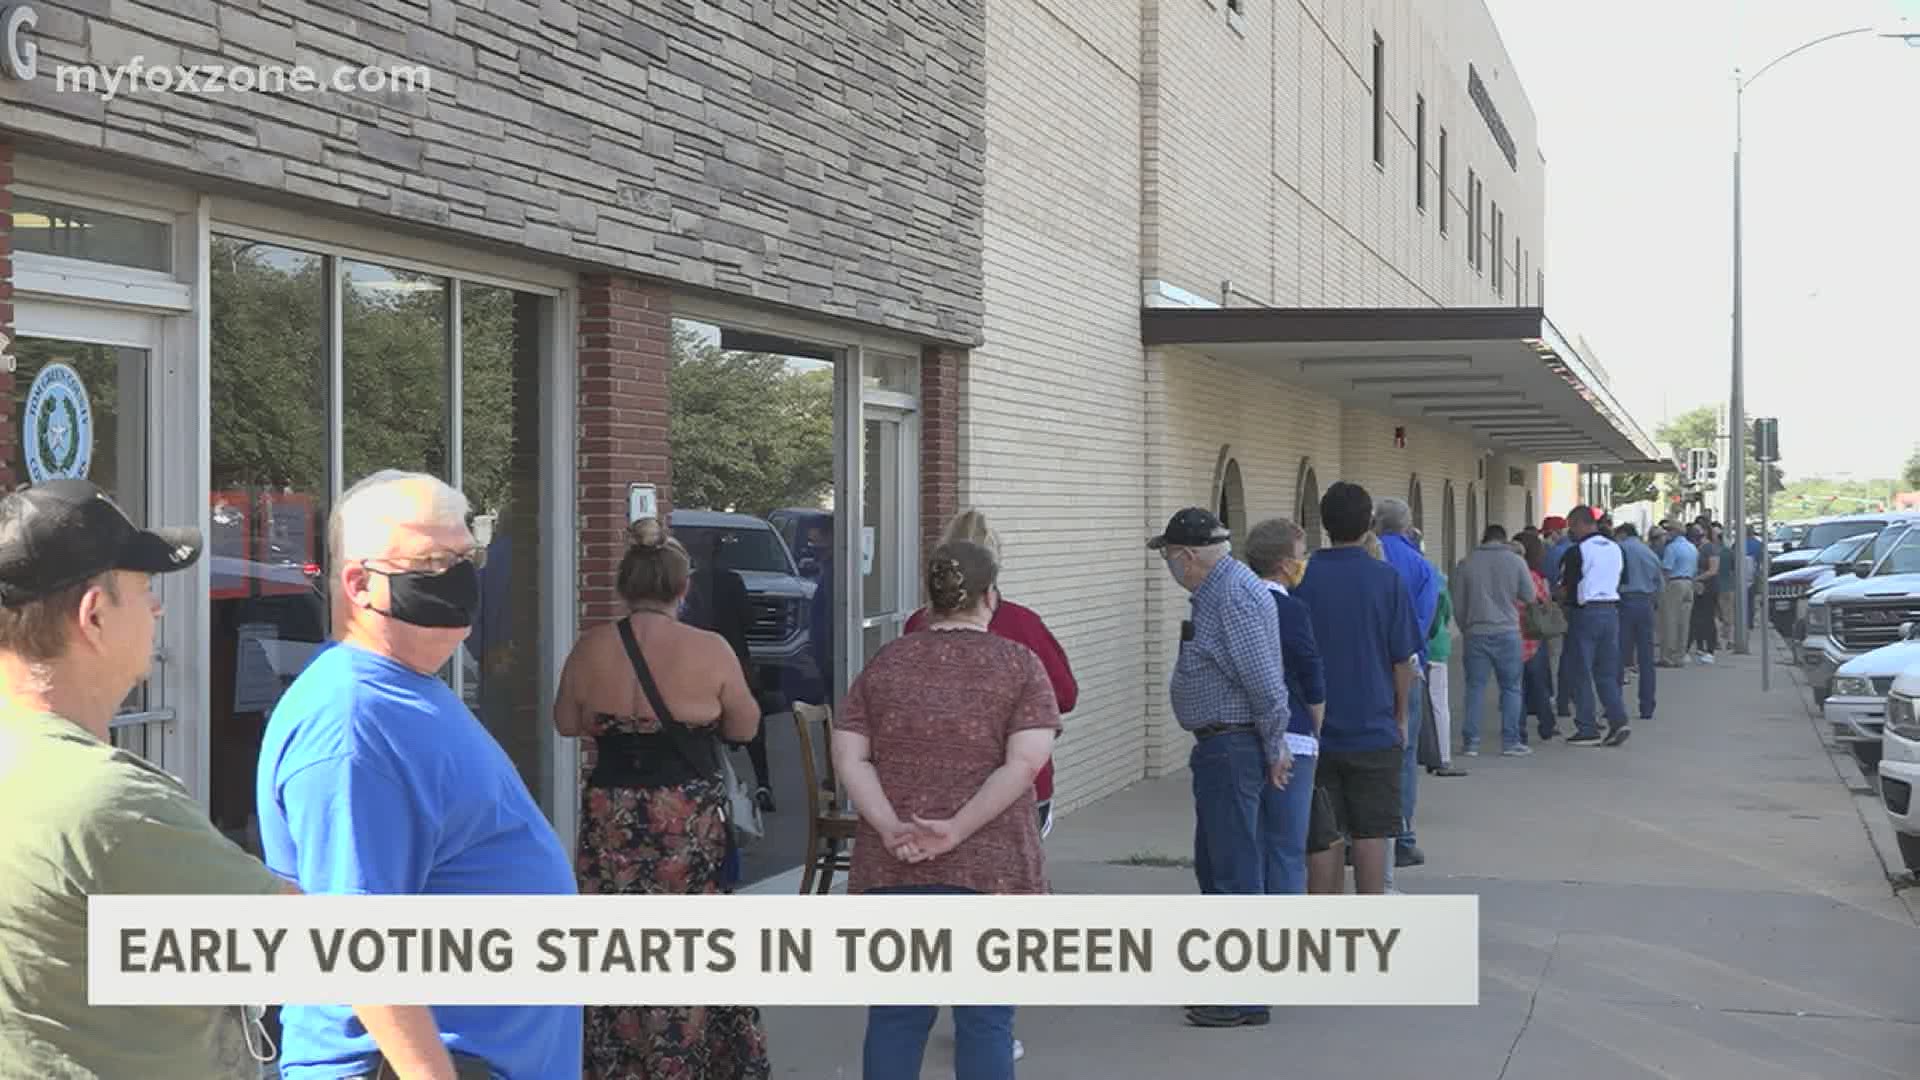 Many voters waited for hours to cast their ballot.